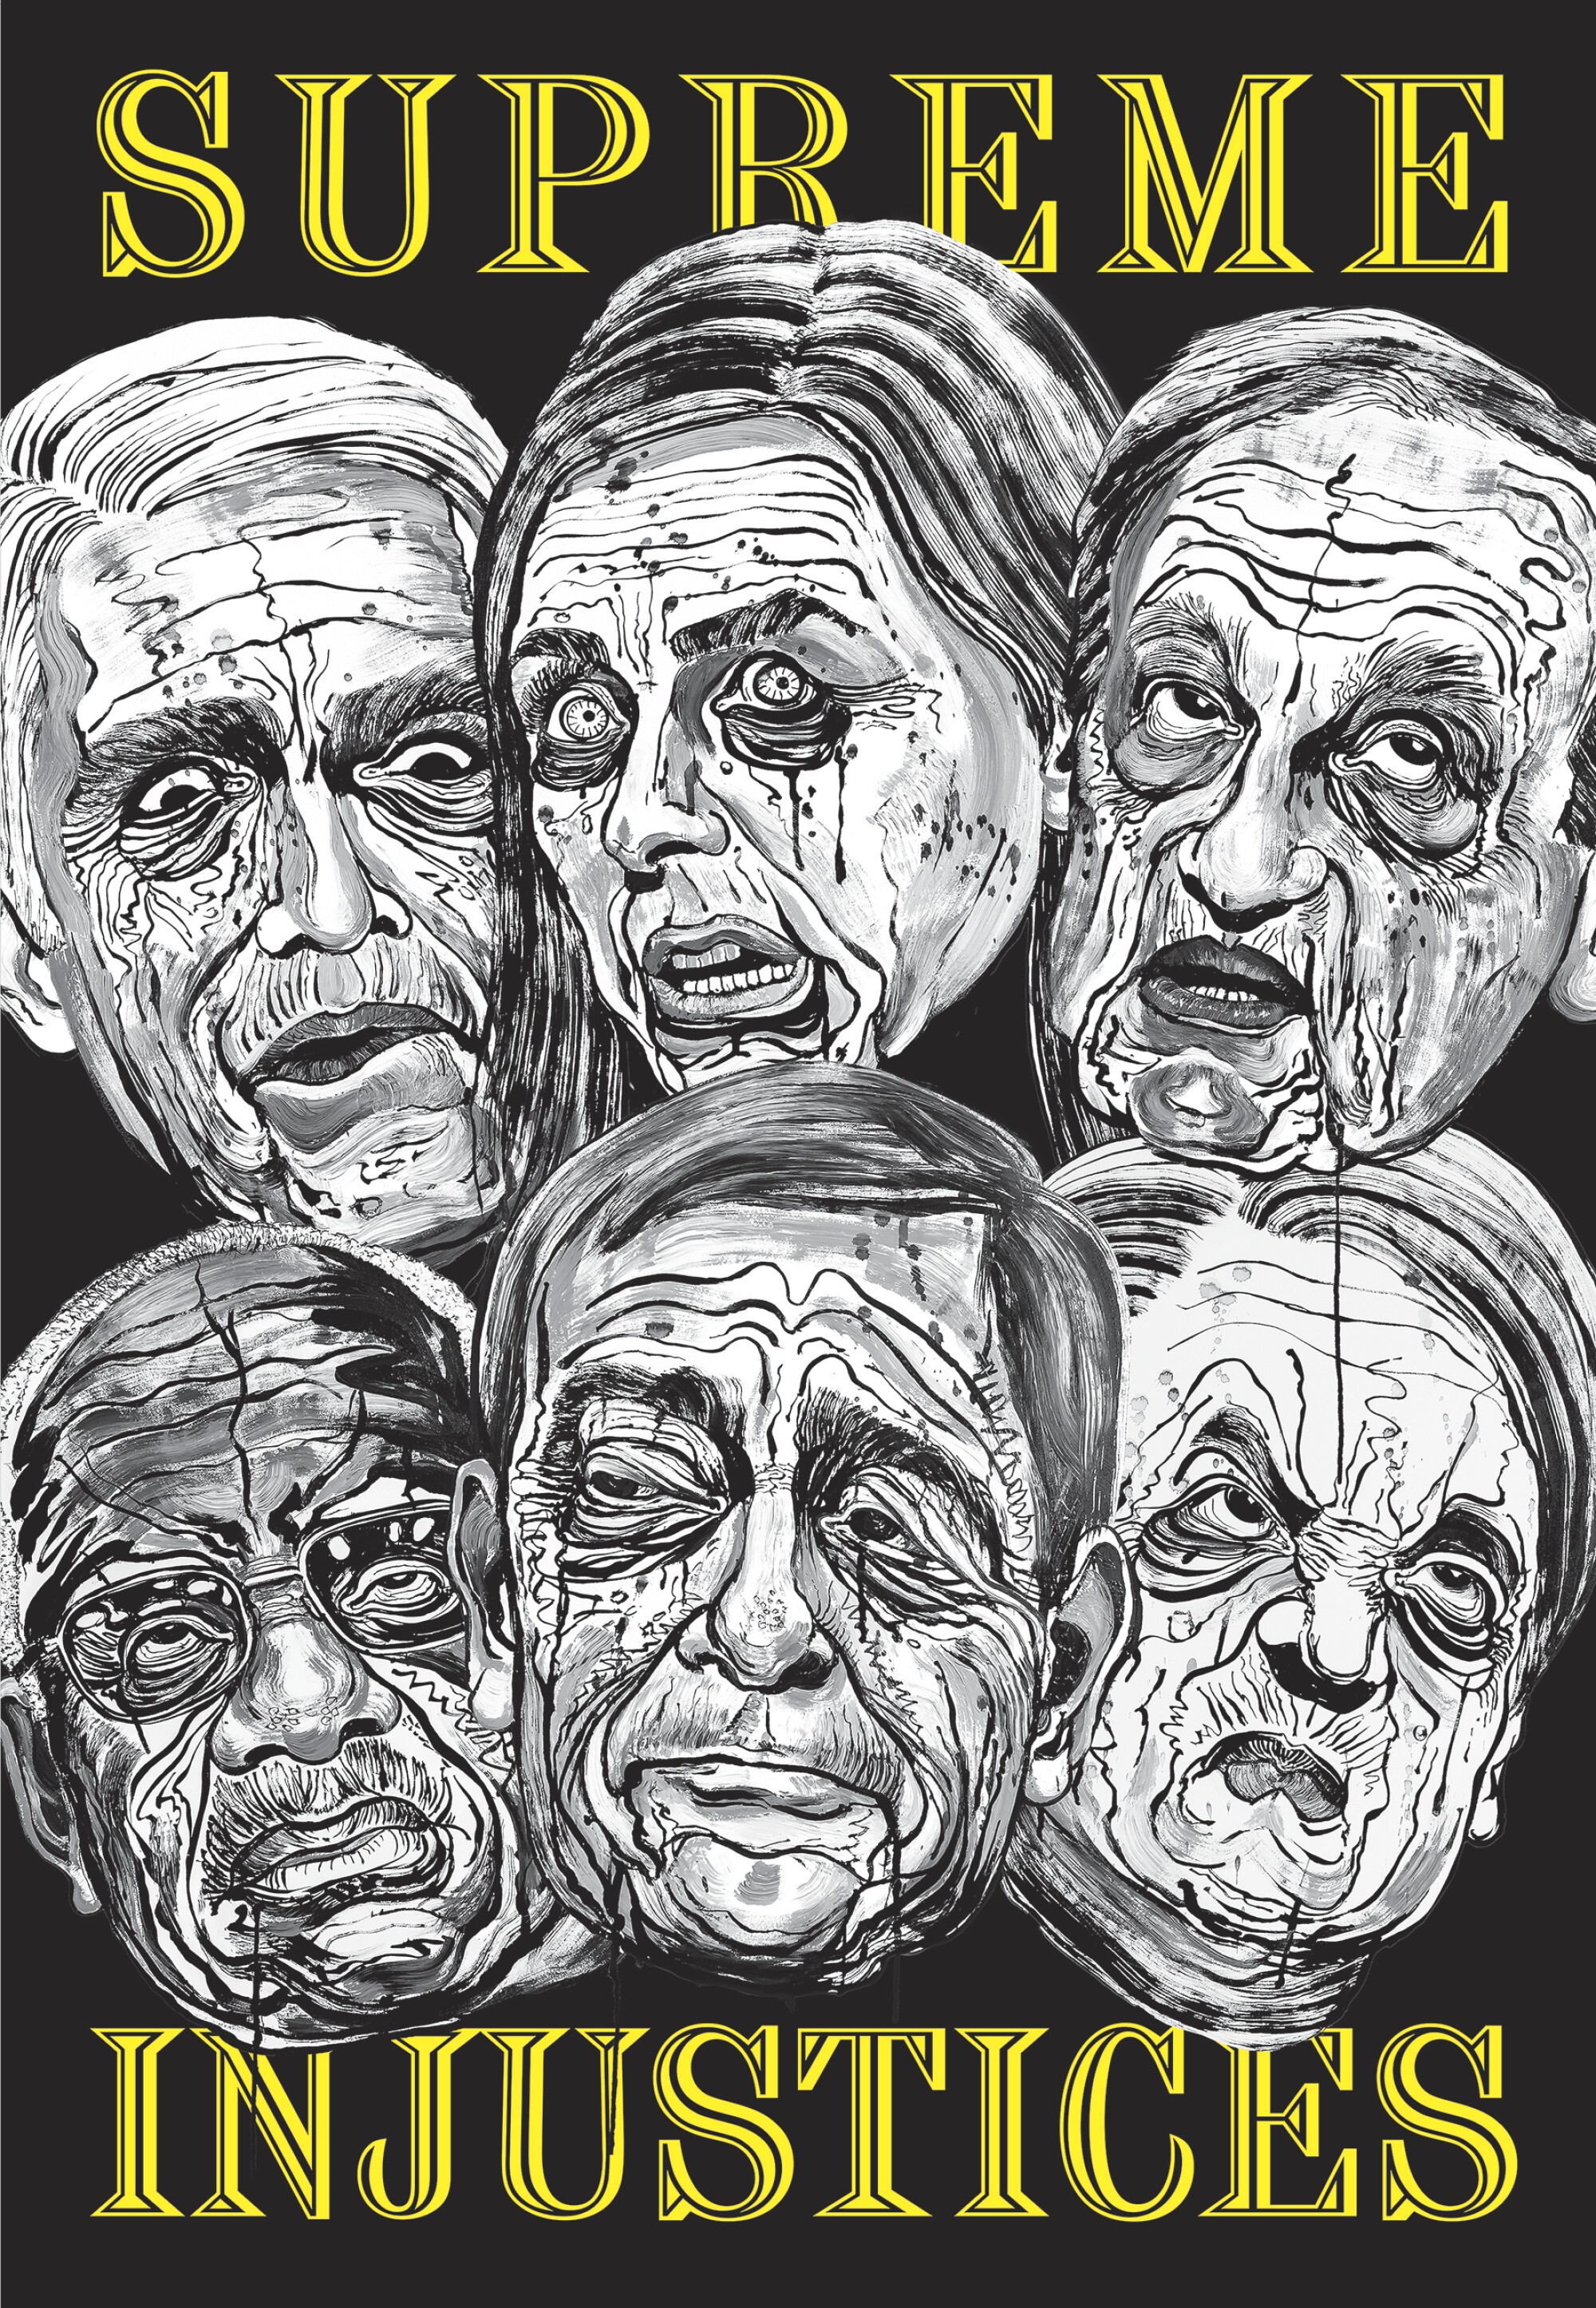 A poster with grotesque caricatures of six of the Supreme Court justices labeled "Supreme Injustices"